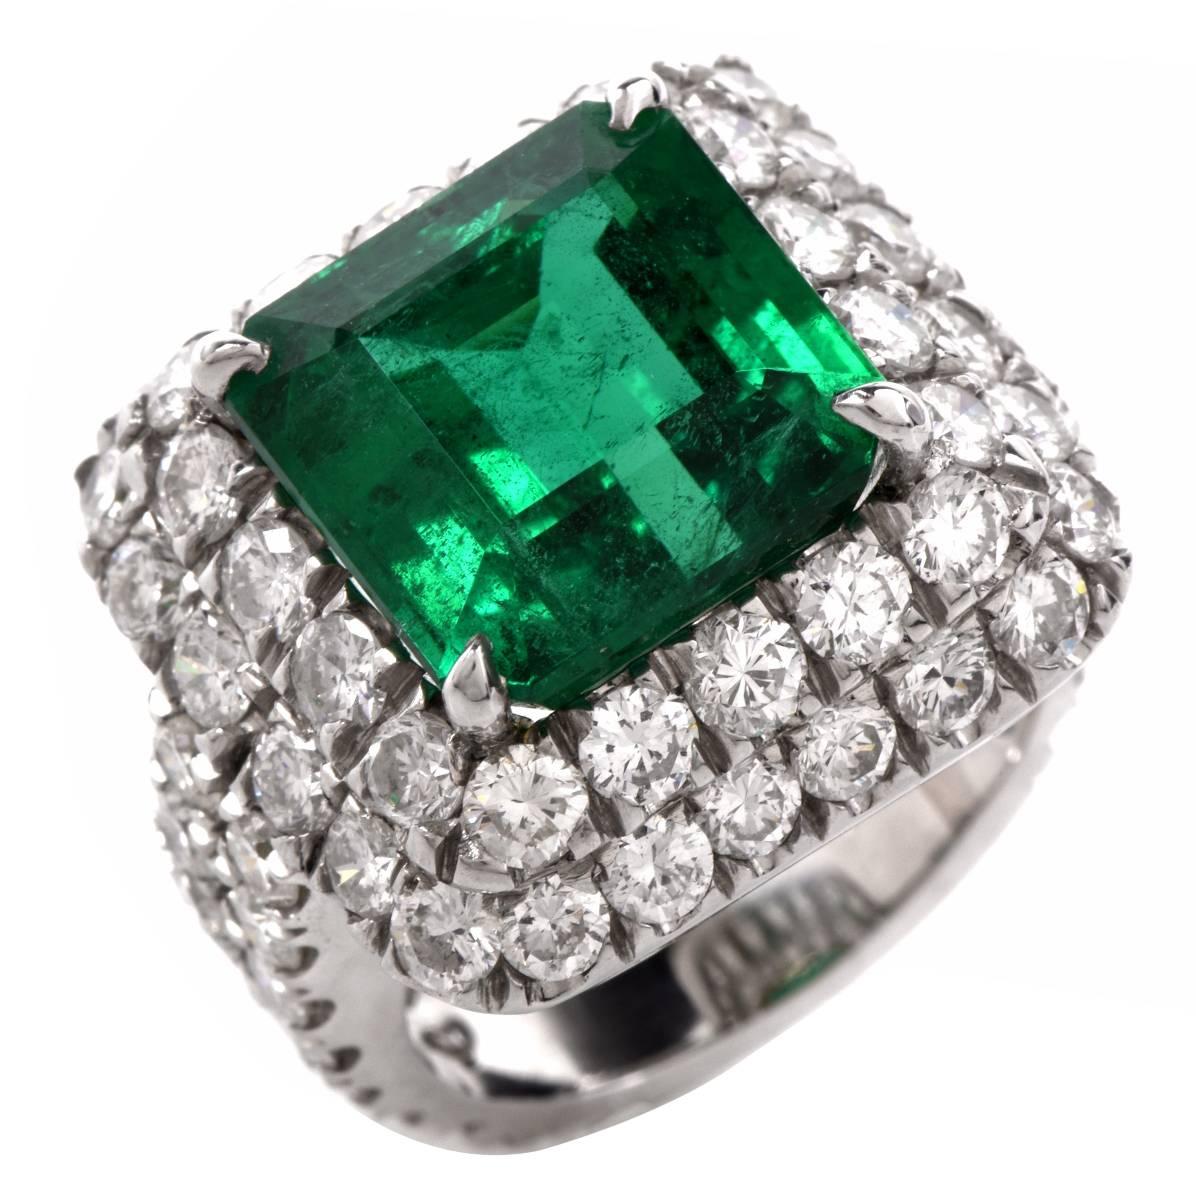 Exceptional 13.67cts Emerald and Diamond Platinum Cocktail Ring